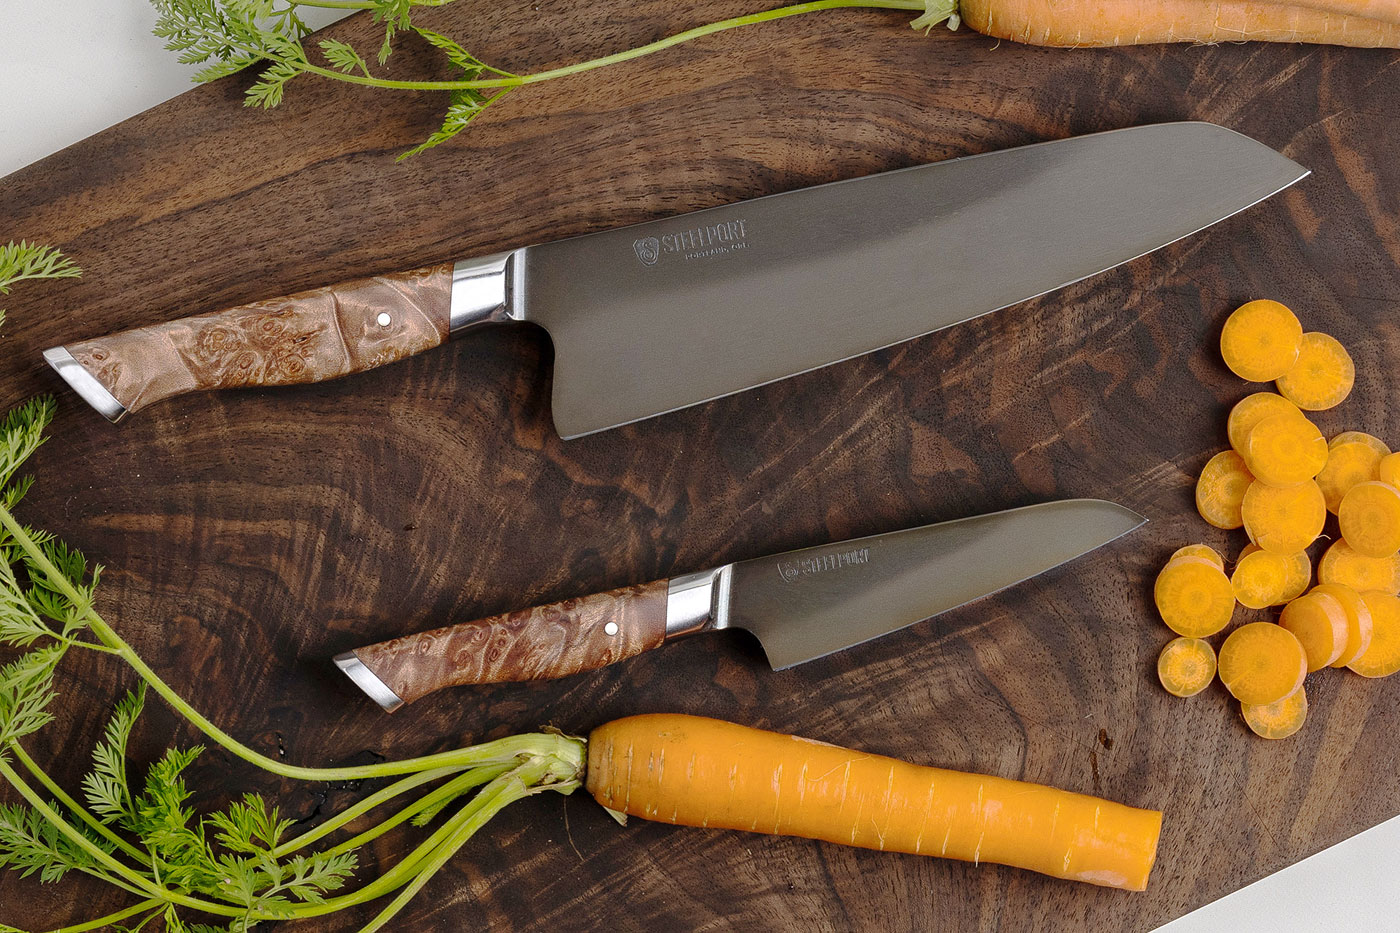 Two Knife Gift Set - Chef Knife (8 in.) and Parer (4 in.) with Bigleaf Maple Burl - 52100 Carbon Steel